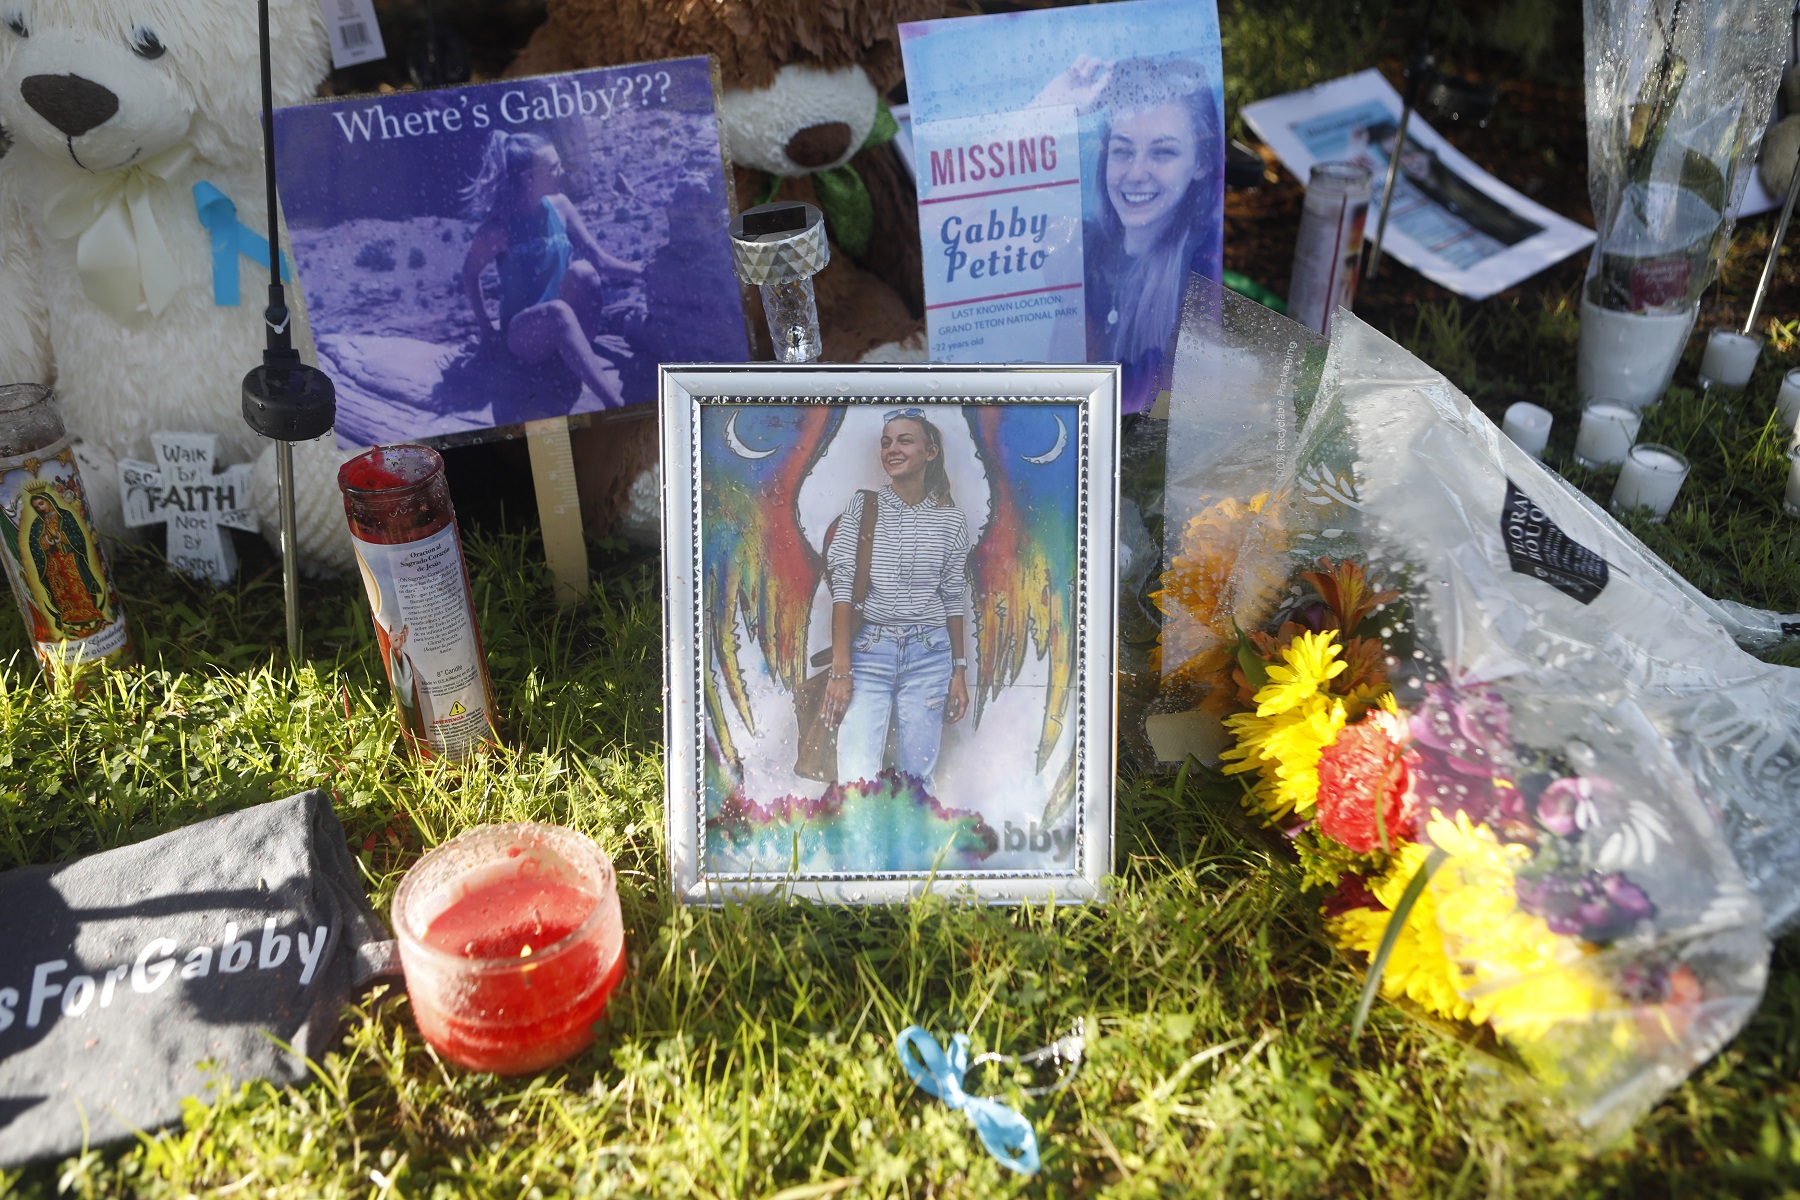 a memorial for Gabby Petito is seen outside of City Hall in North Port, Florida on Sept. 20